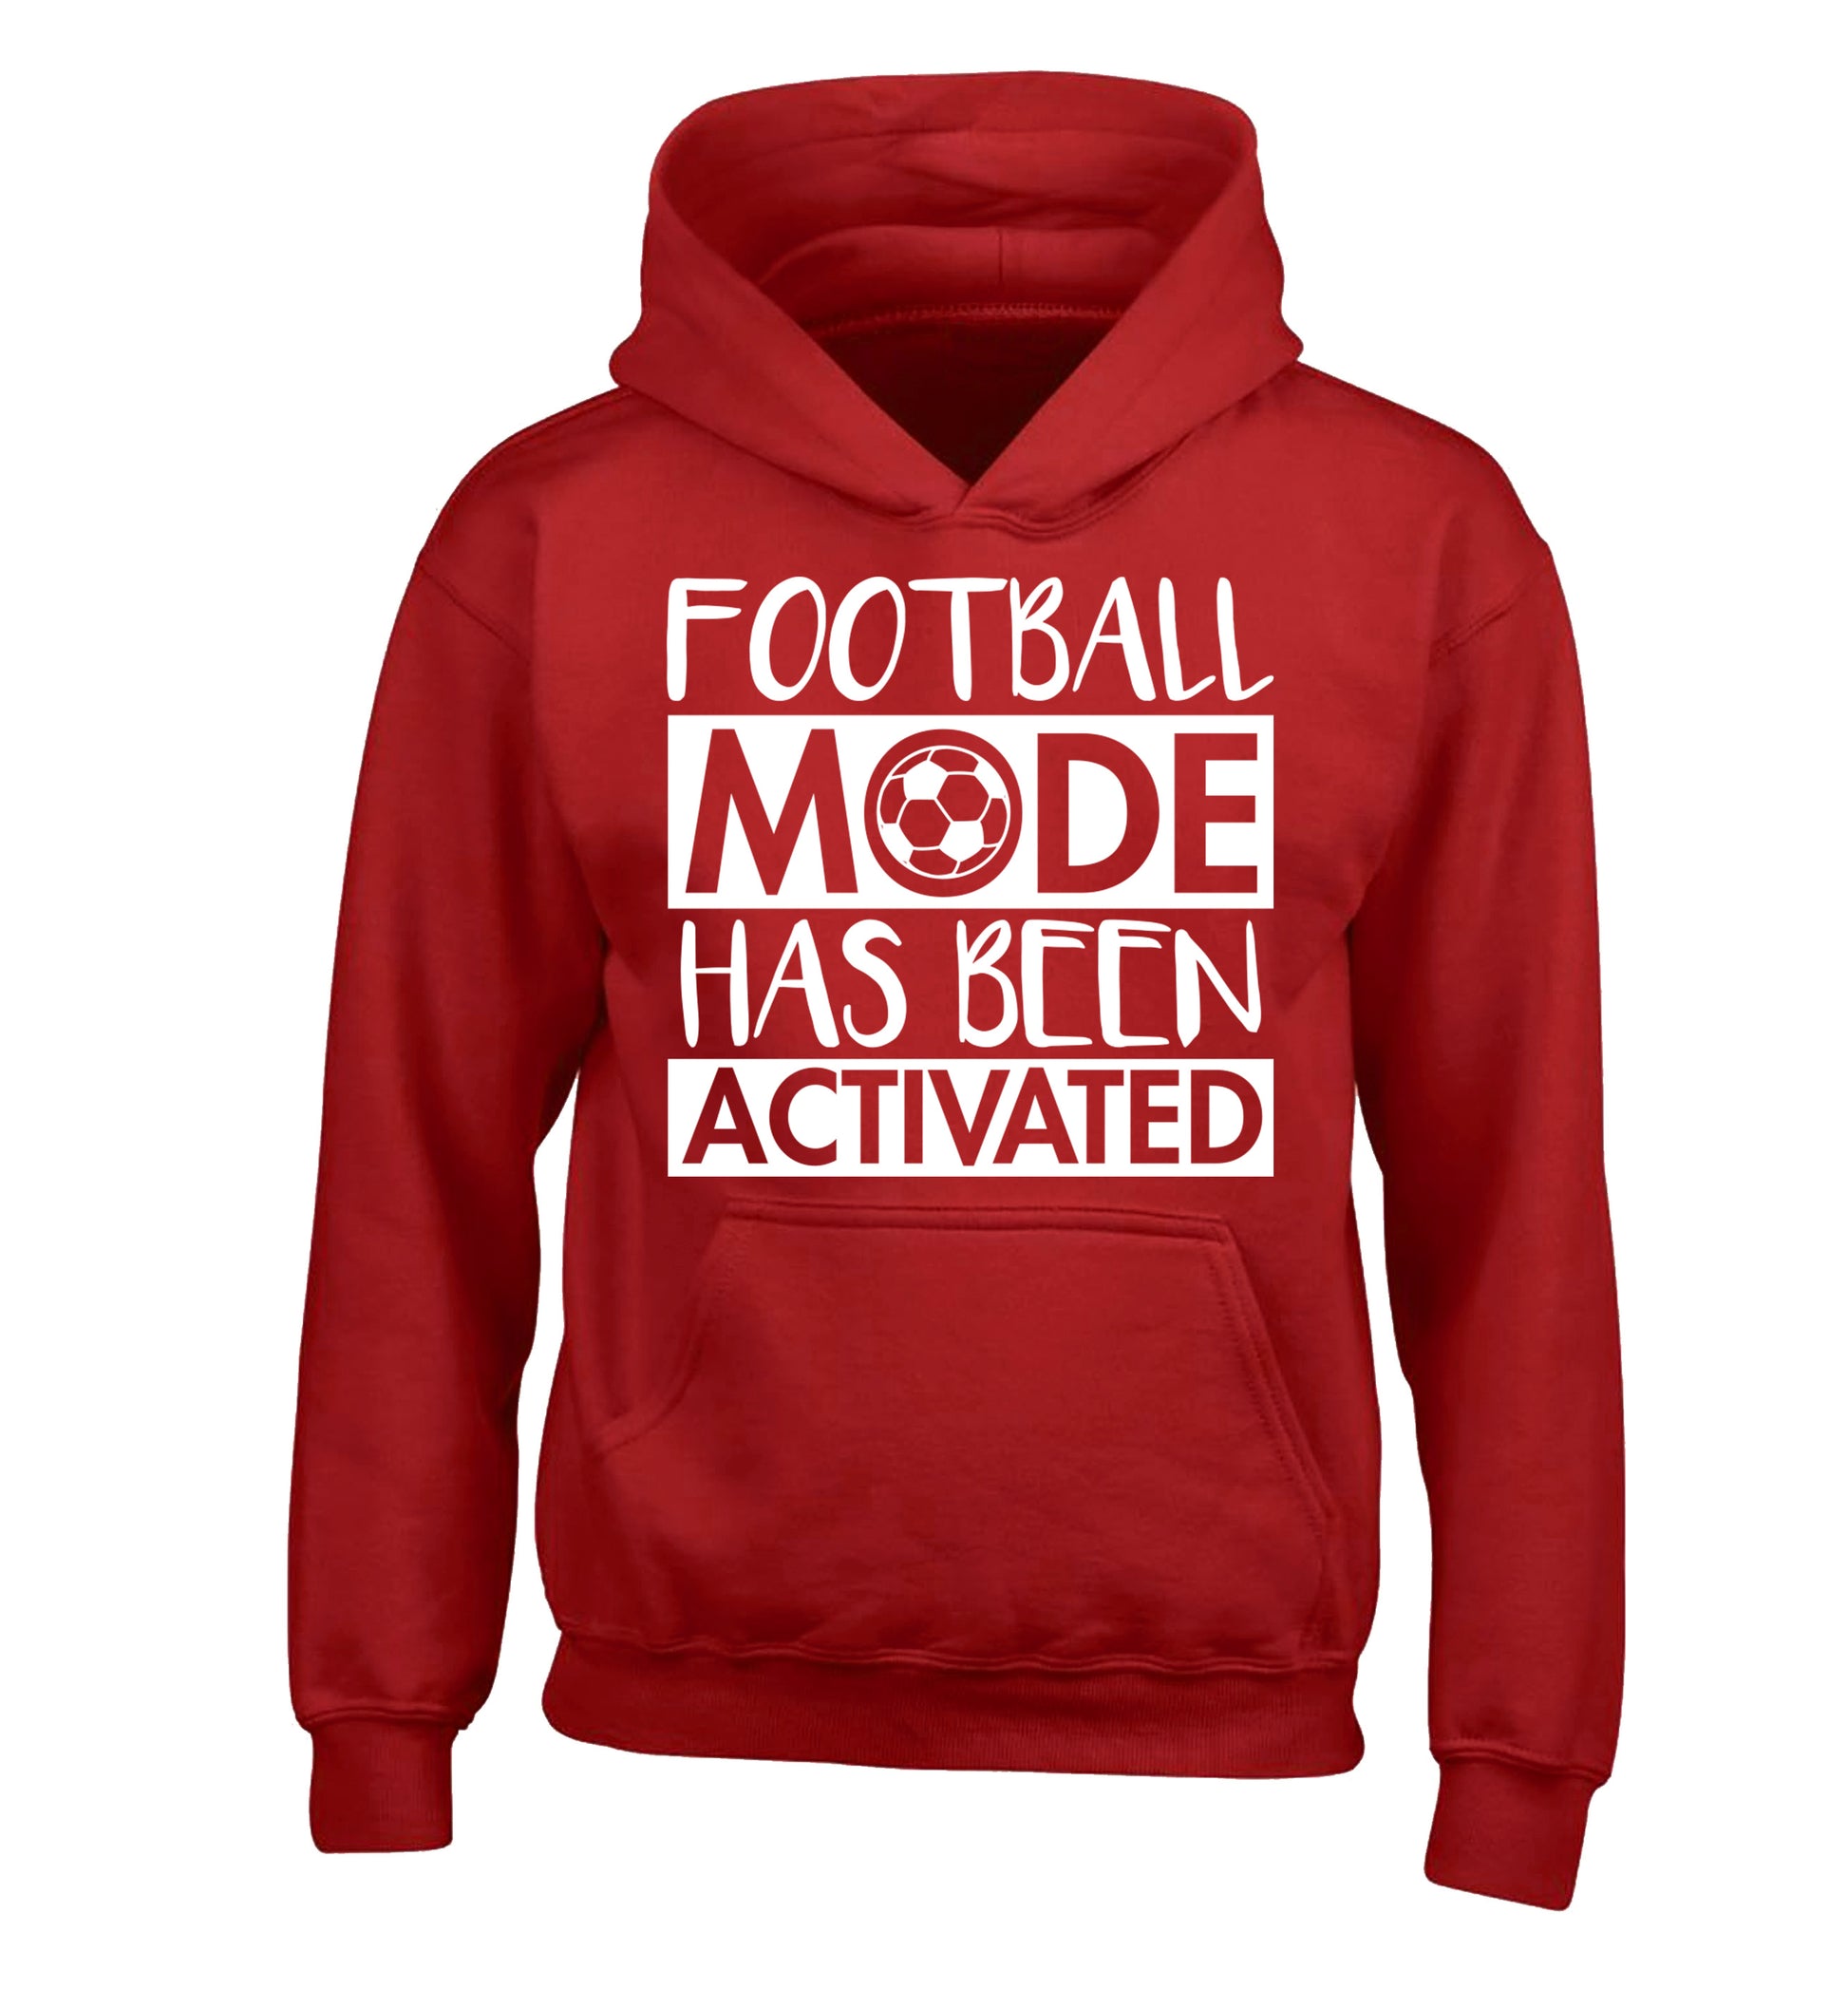 Football mode has been activated children's red hoodie 12-14 Years